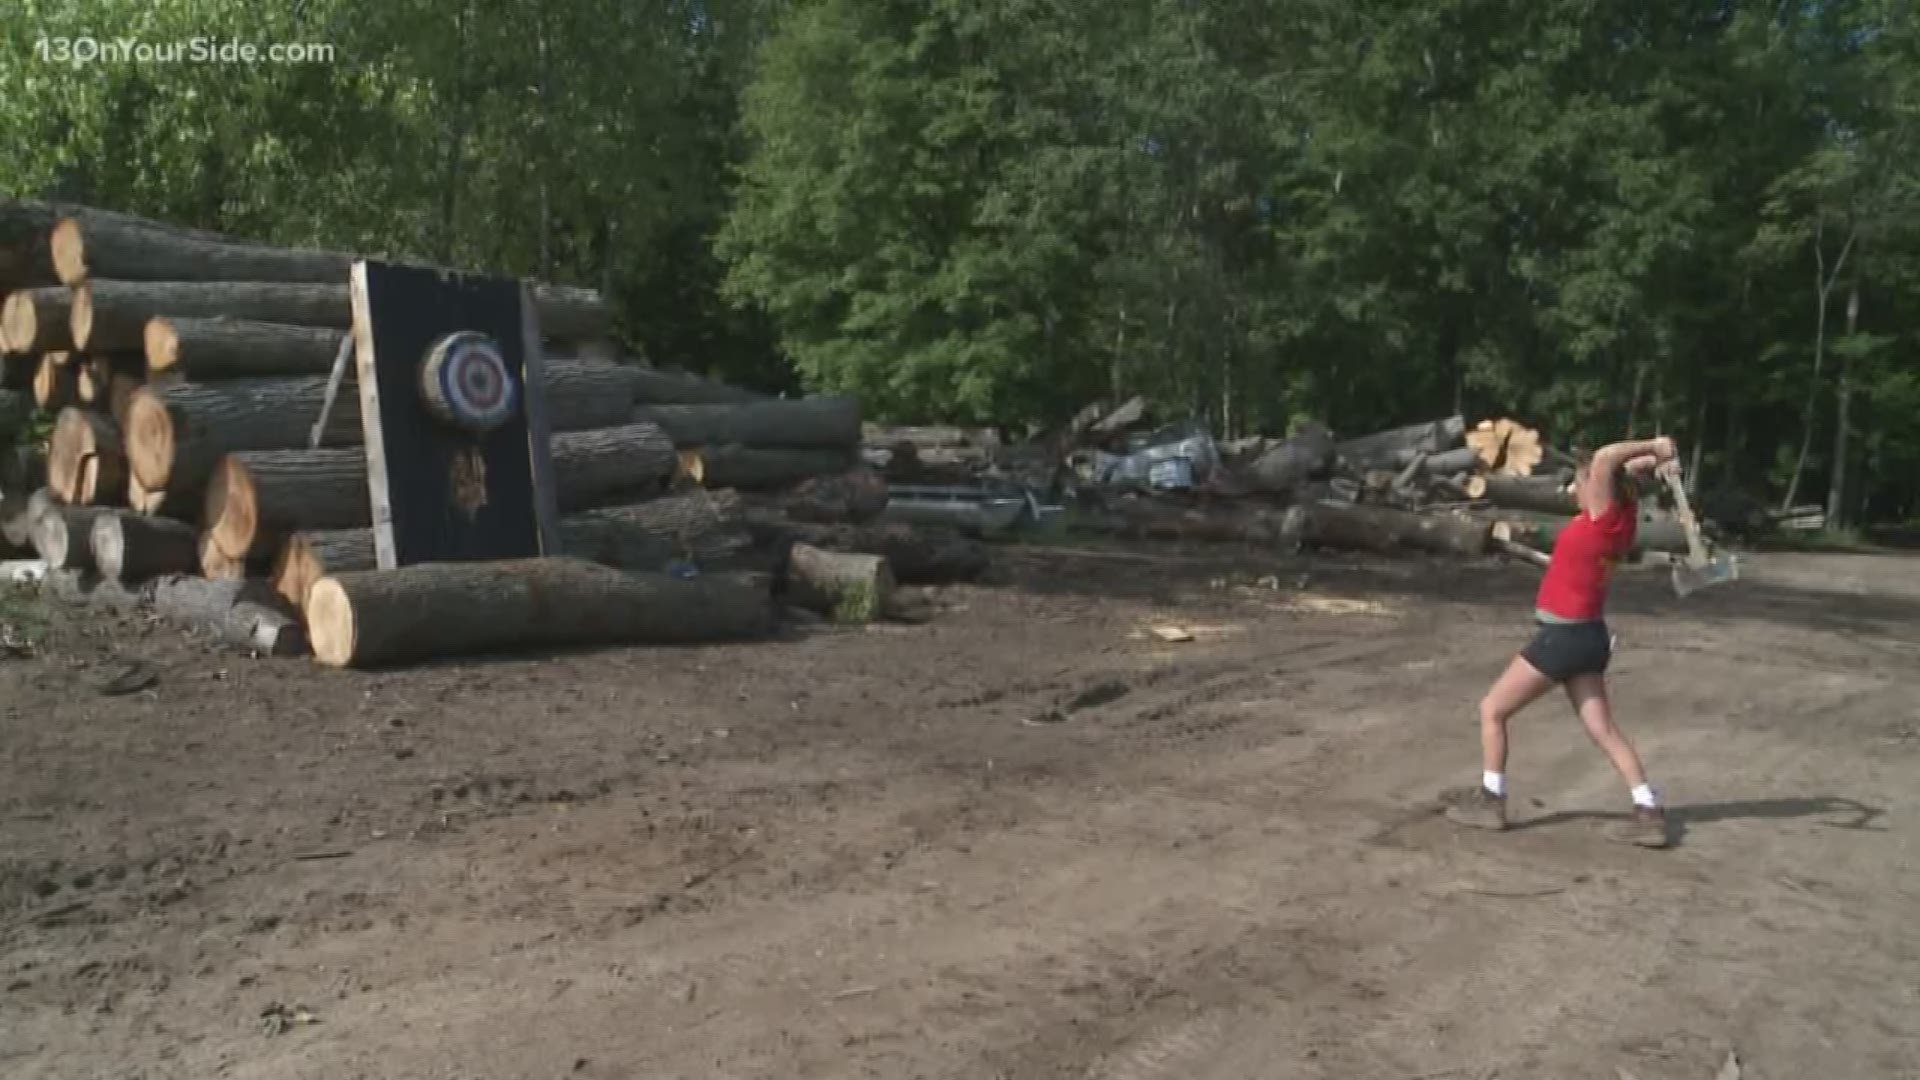 Logging is an important part of Michigan history and there is a big festival underway this weekend in Newaygo to celebrate that. From axe throwing and horse pulls to chainsaw carving and a pageant for the little ones, the Logging Festival is the perfect opportunity to get your inner lumberjack on.